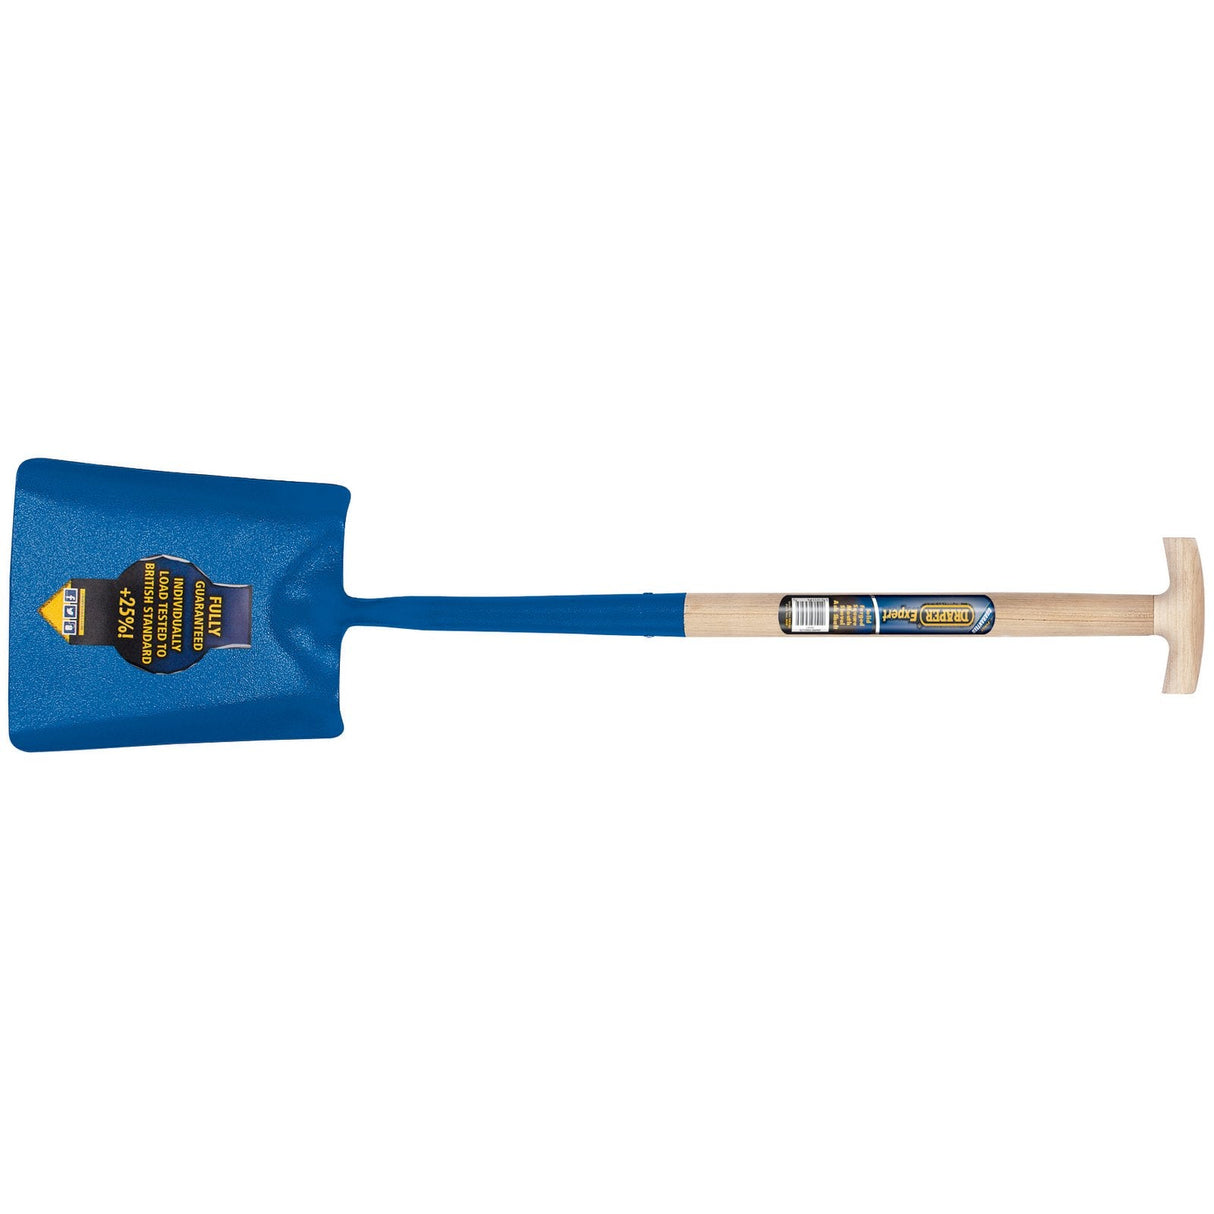 Draper Expert Contractors Square Mouth Shovel With Ash Shaft And T-Handle - SMSSS-WHT/H - Farming Parts